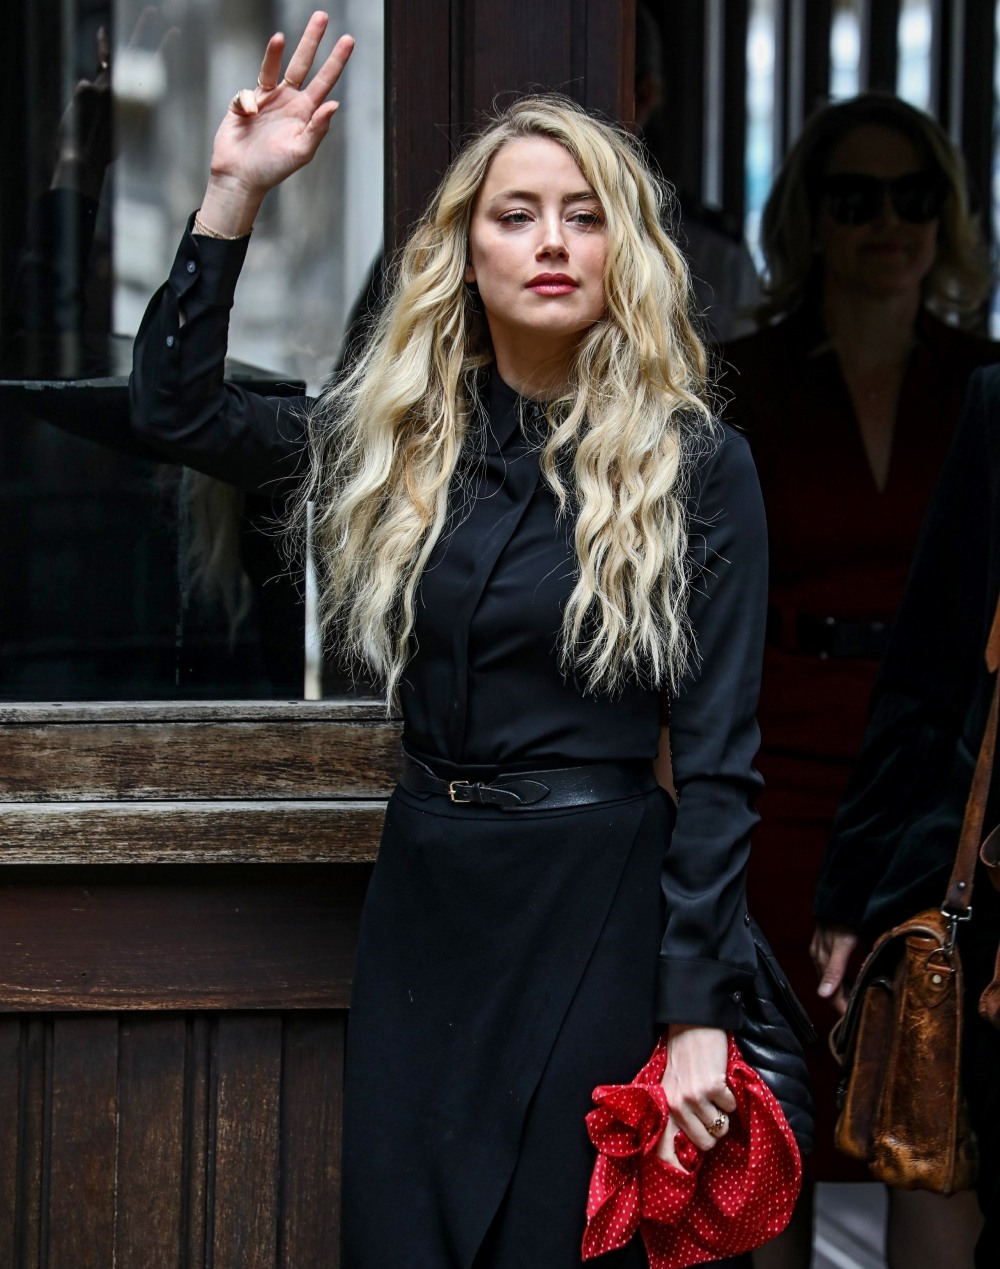 Amber Heard and Johnny Depp arrive for their last day at the Royal Courts of Justice